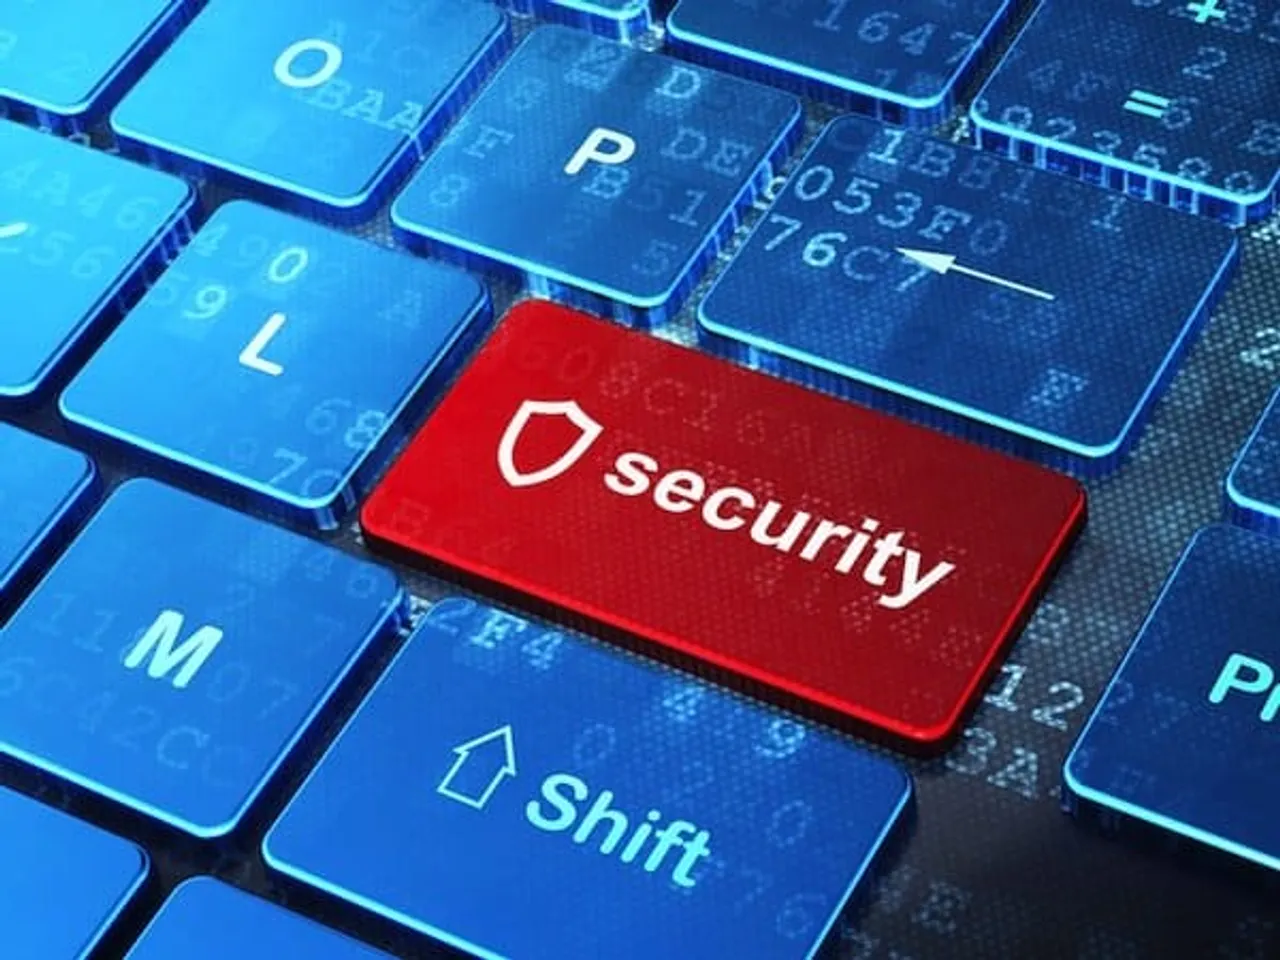 India ranks 23rd in cybersecurity index